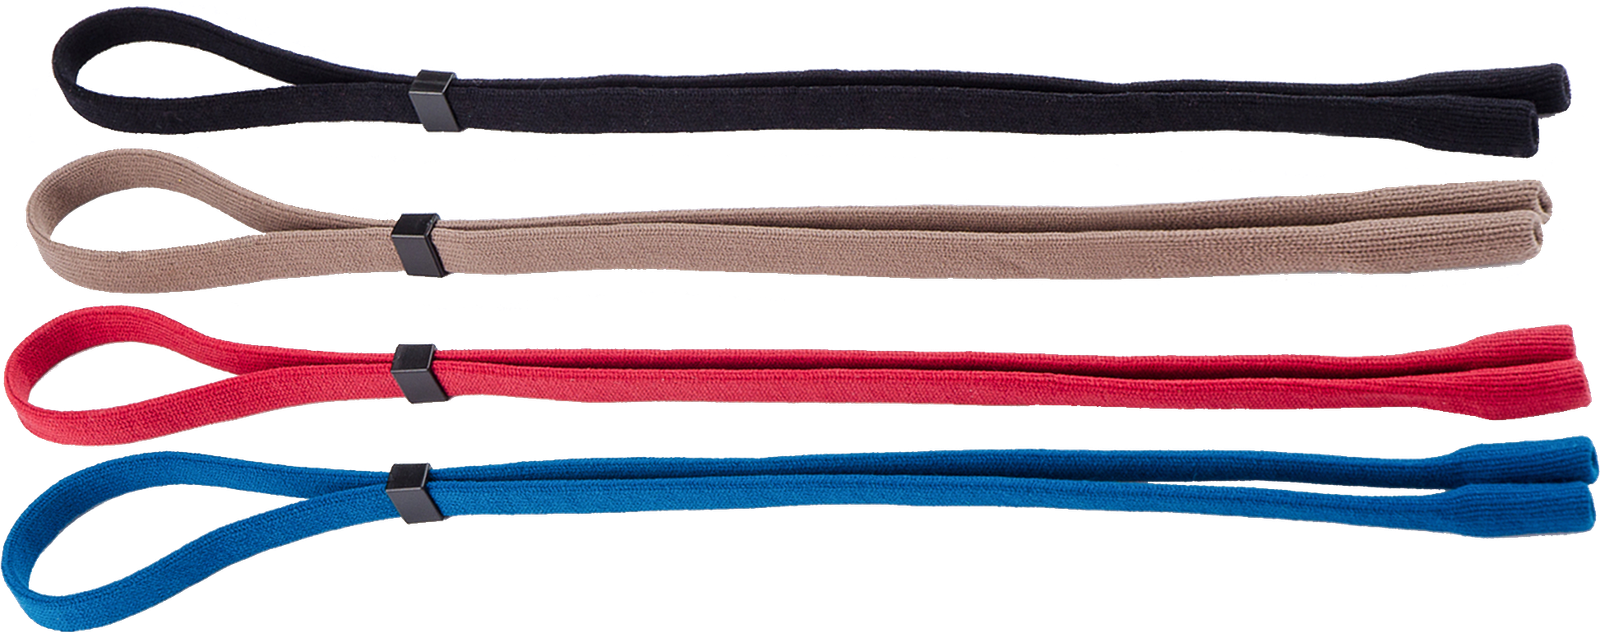 Anchor Glasses Straps 4-Pack for Glasses and Sunglasses in Black, Brown, Red, and Blue.